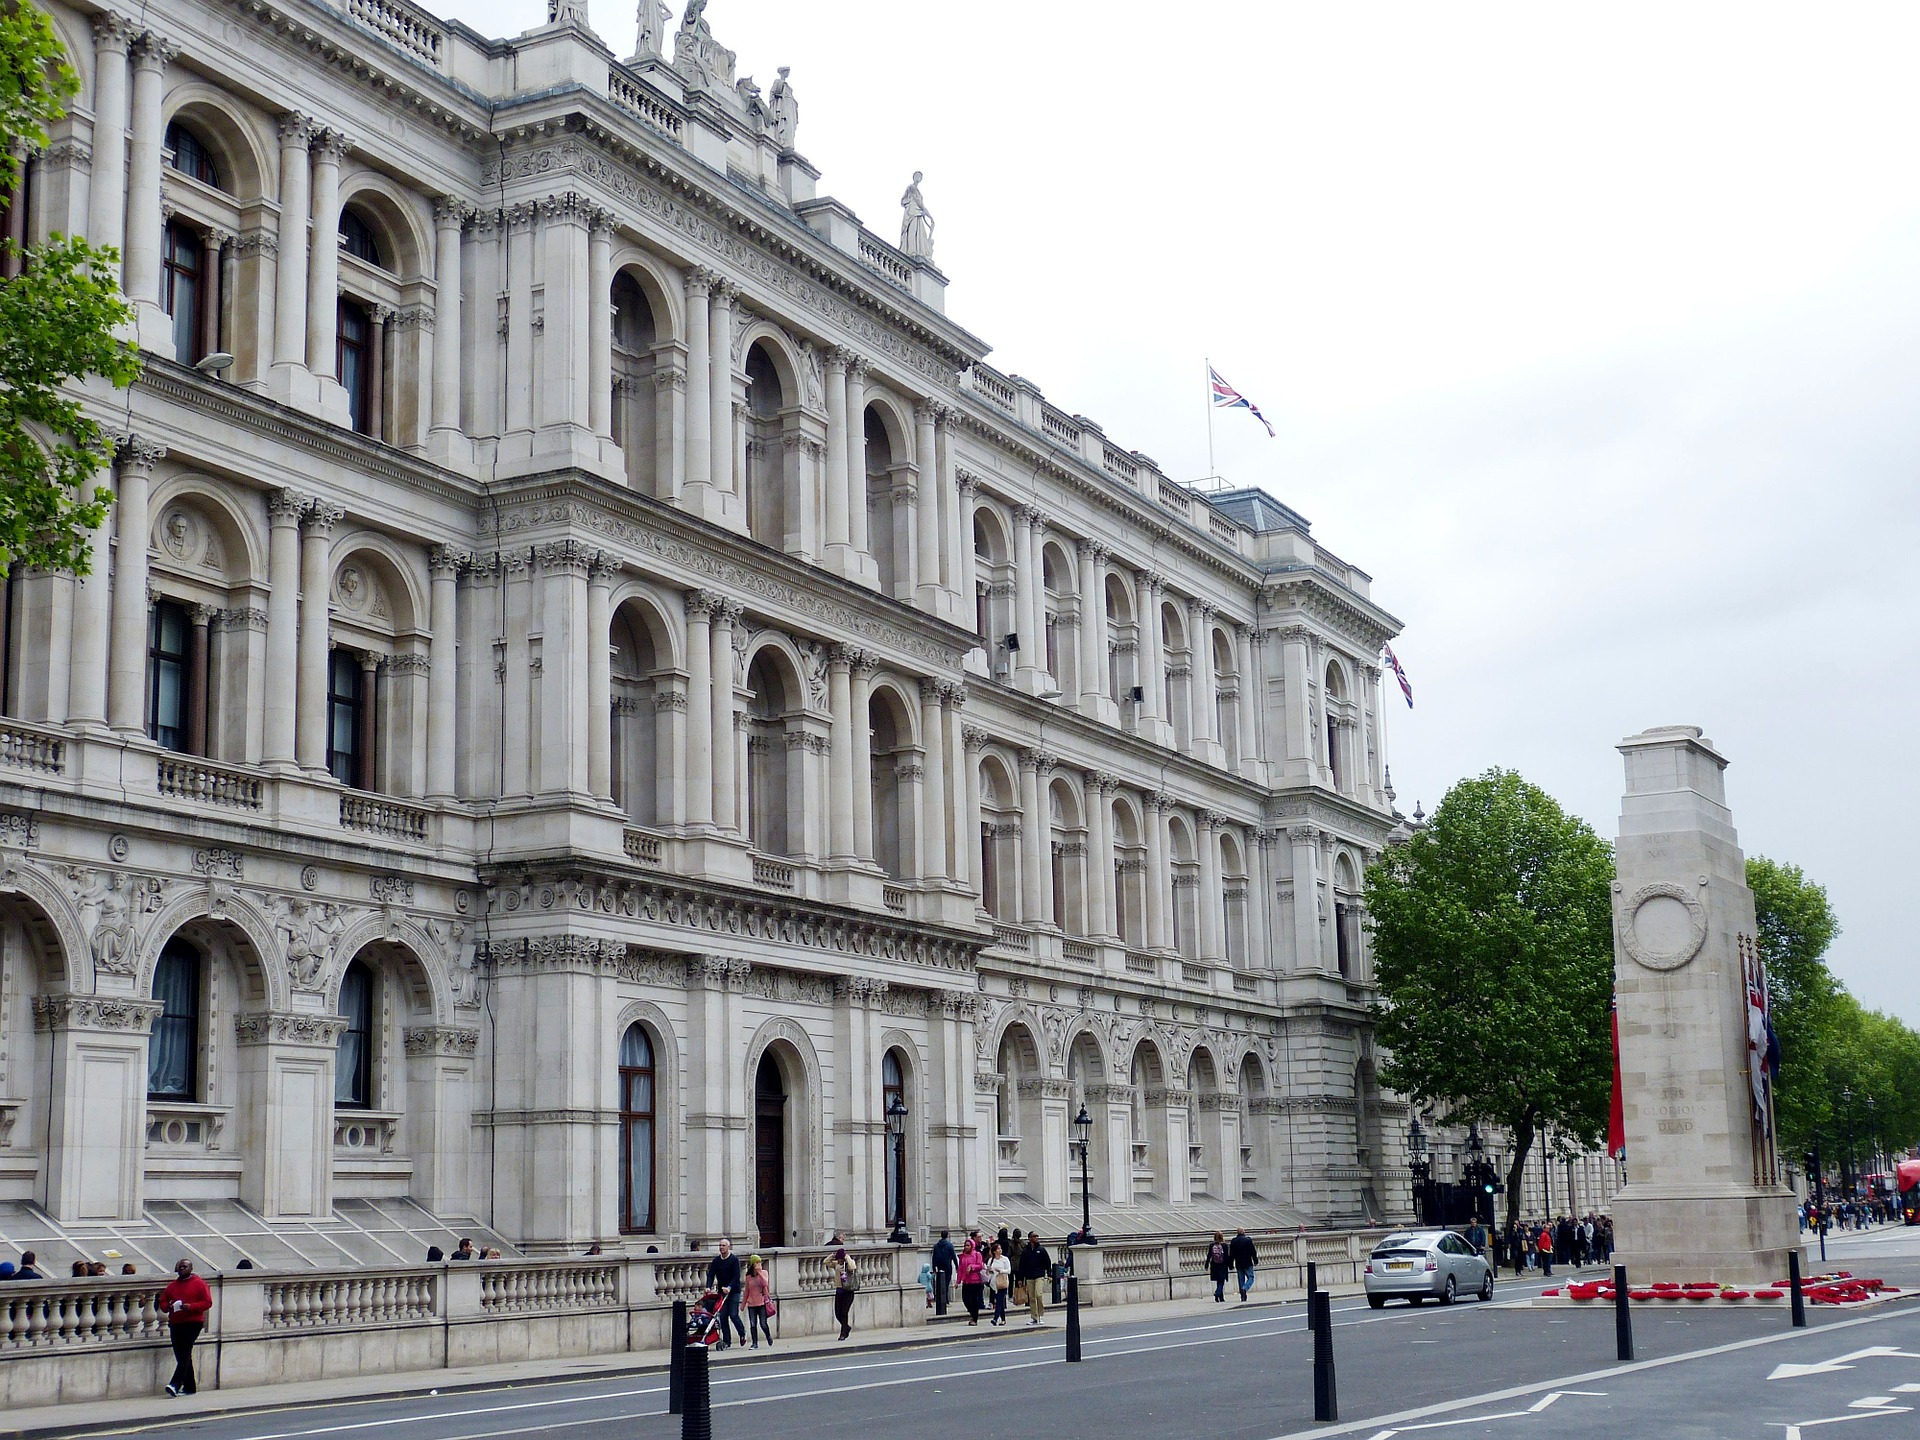 UK Foreign Office hit by major cyberattack